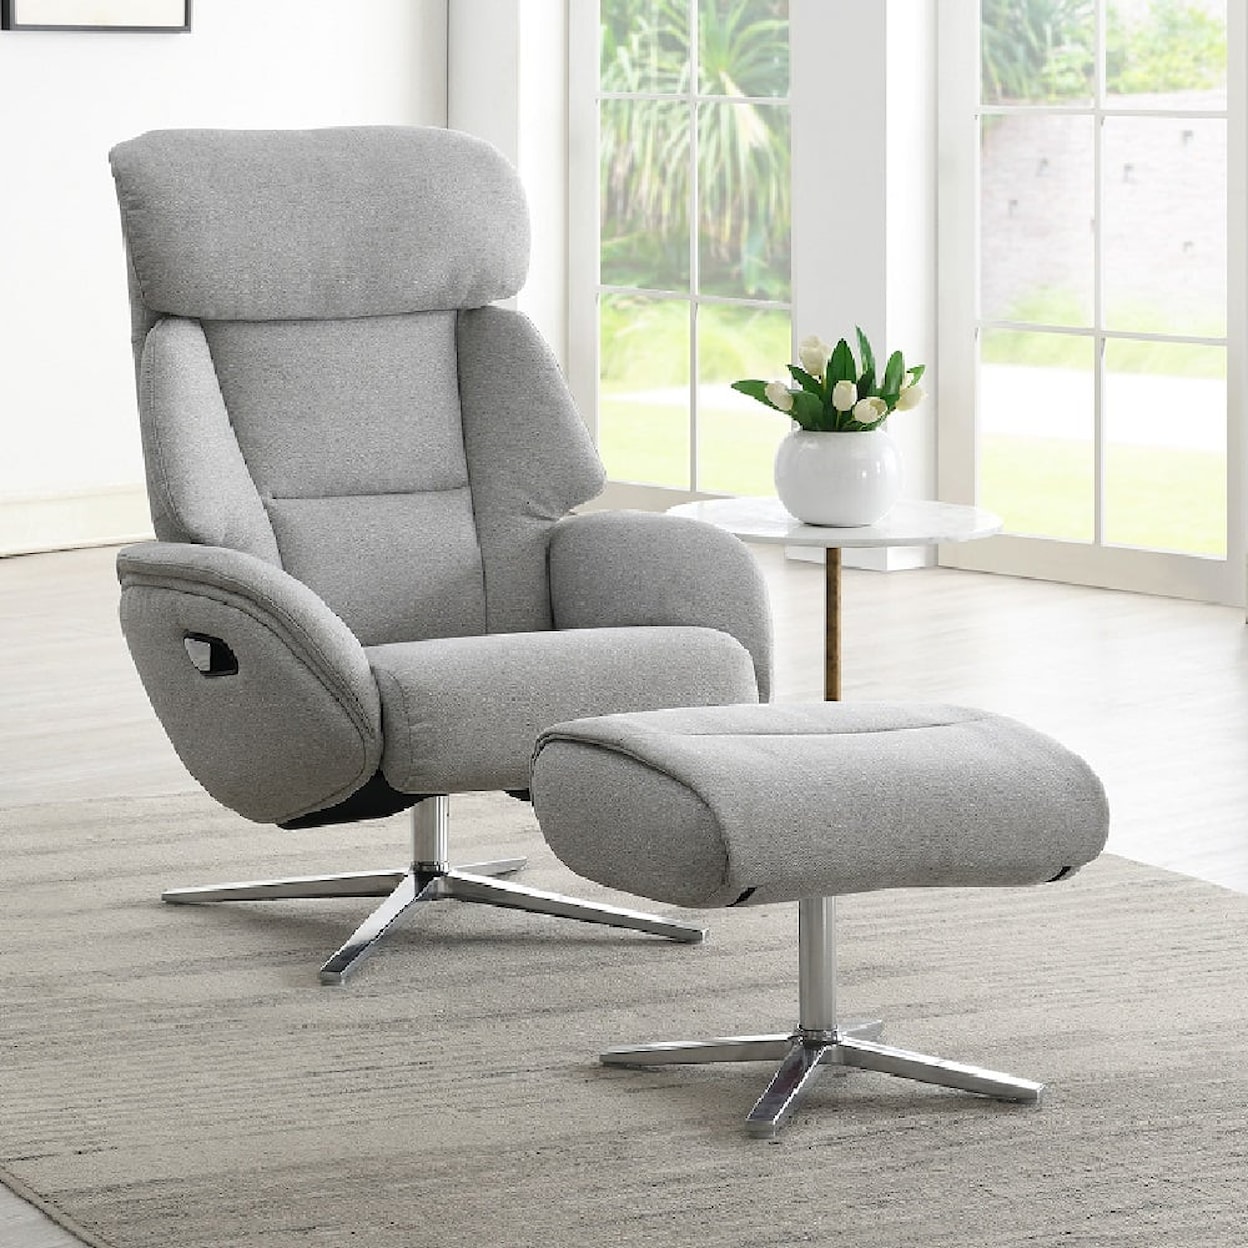 Acme Furniture Madrona Swivel Chair with Ottoman